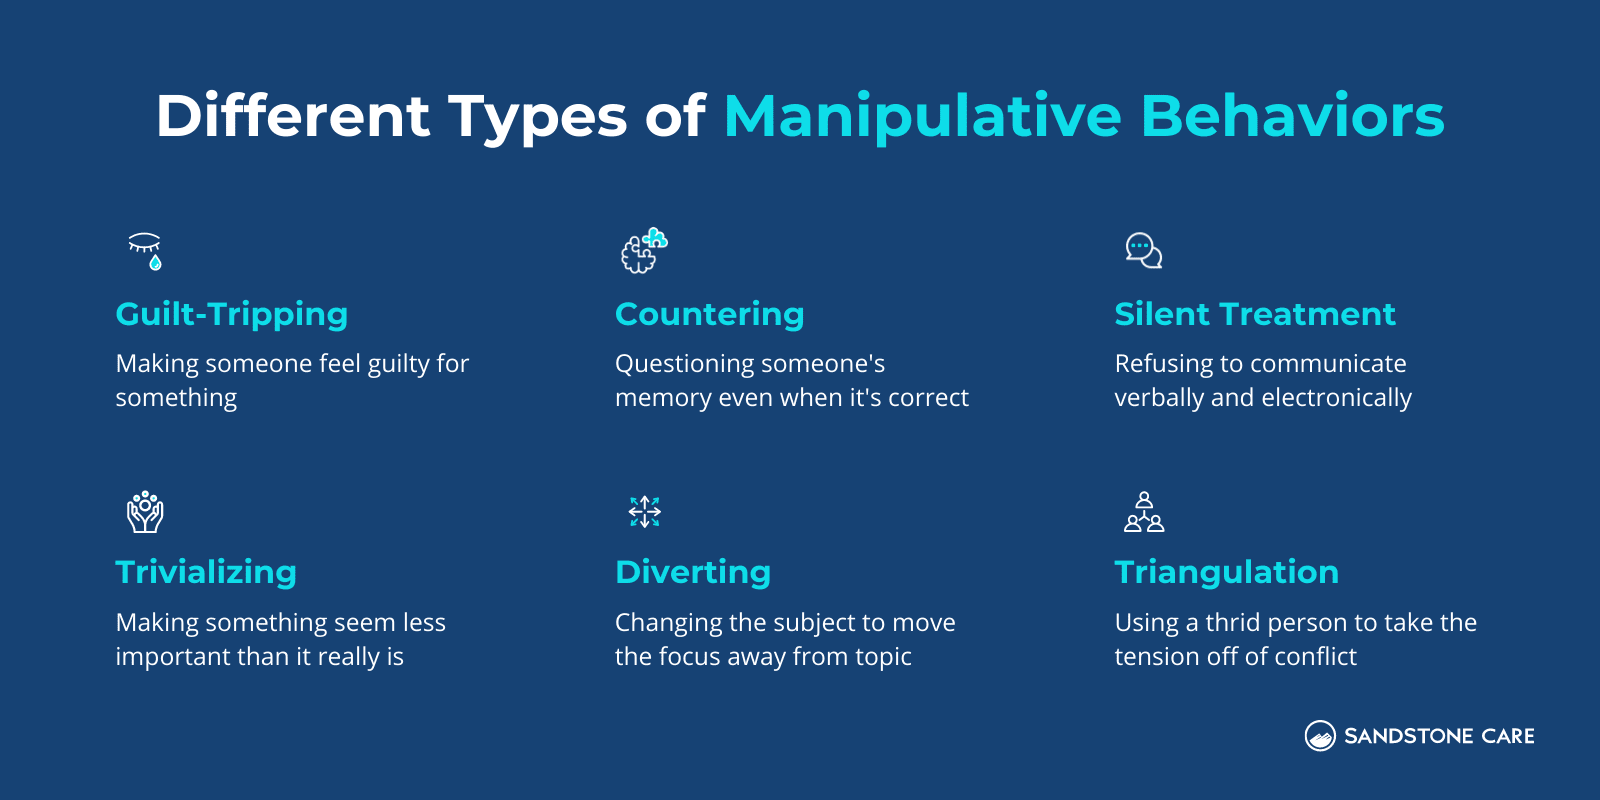 "Different Types of Manipulative Behaviors" written on top of list of 6 behaviors with relevant icons and explanation